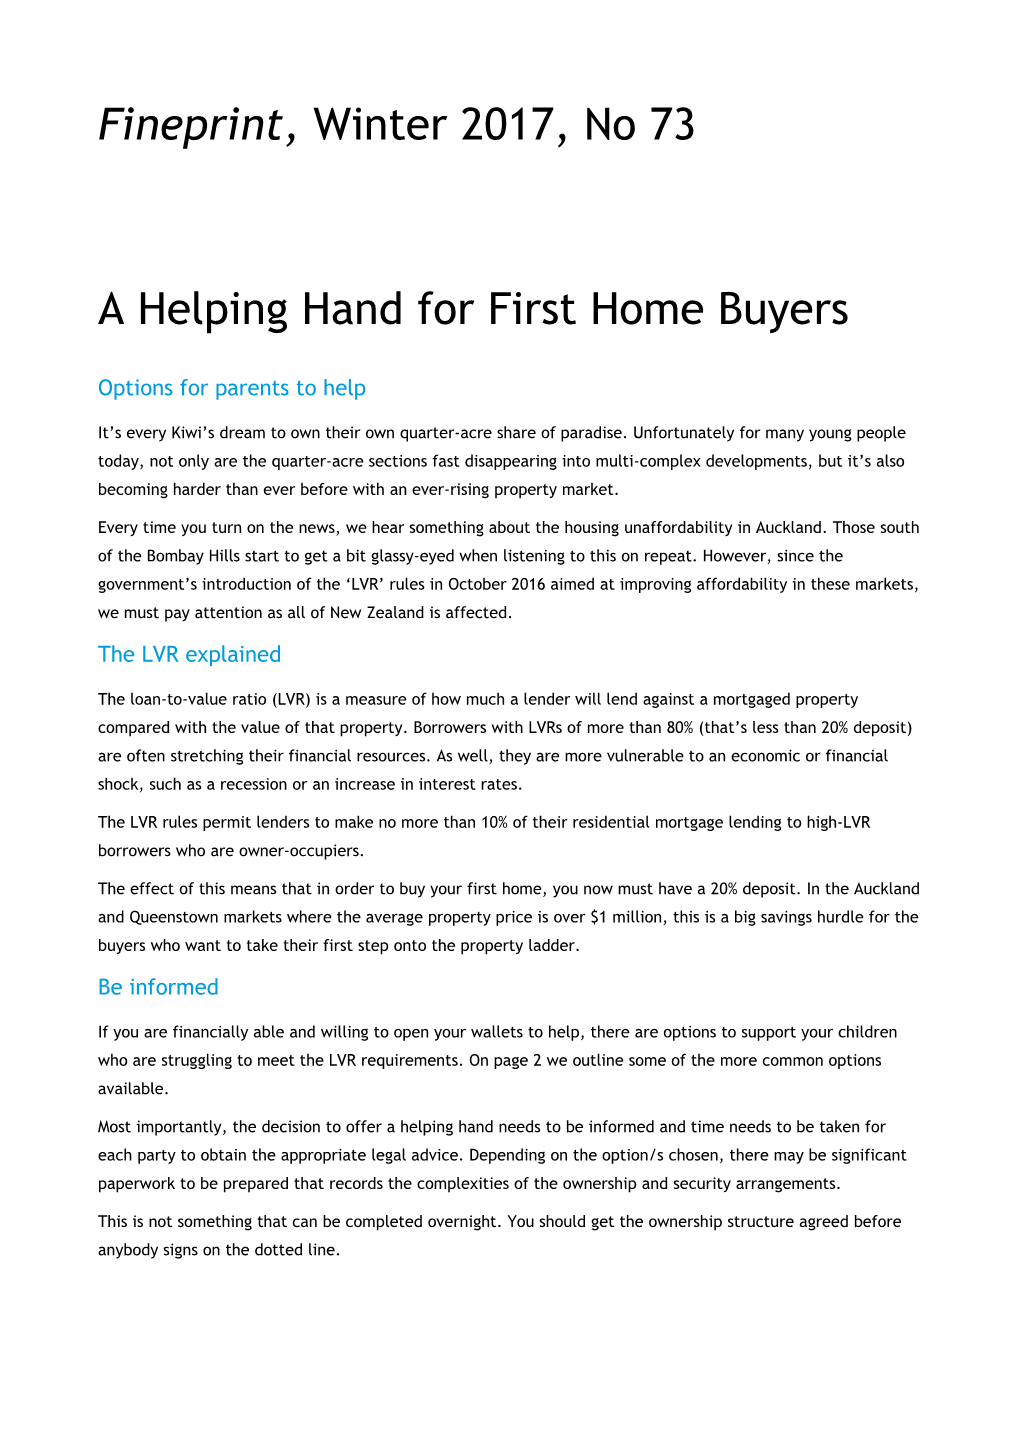 A Helping Hand for First Home Buyers